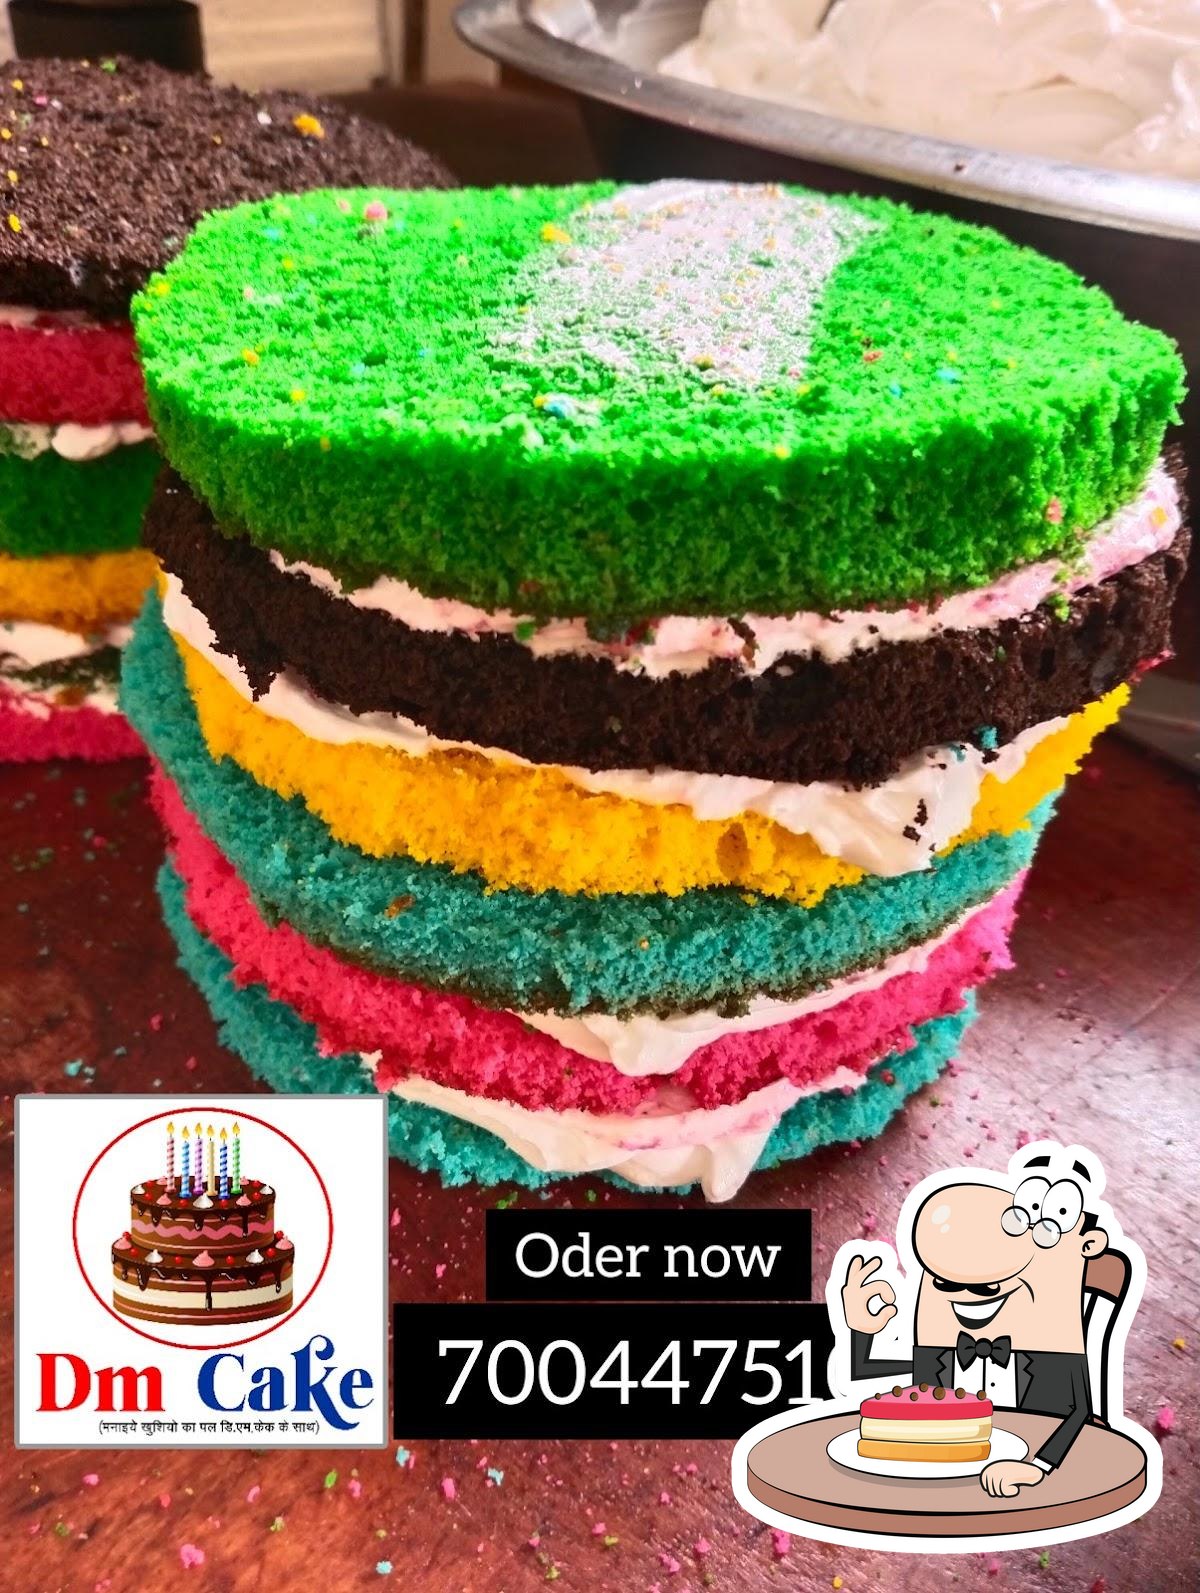 Sifa Bakery in D M Road,Lucknow - Best Bakeries in Lucknow - Justdial